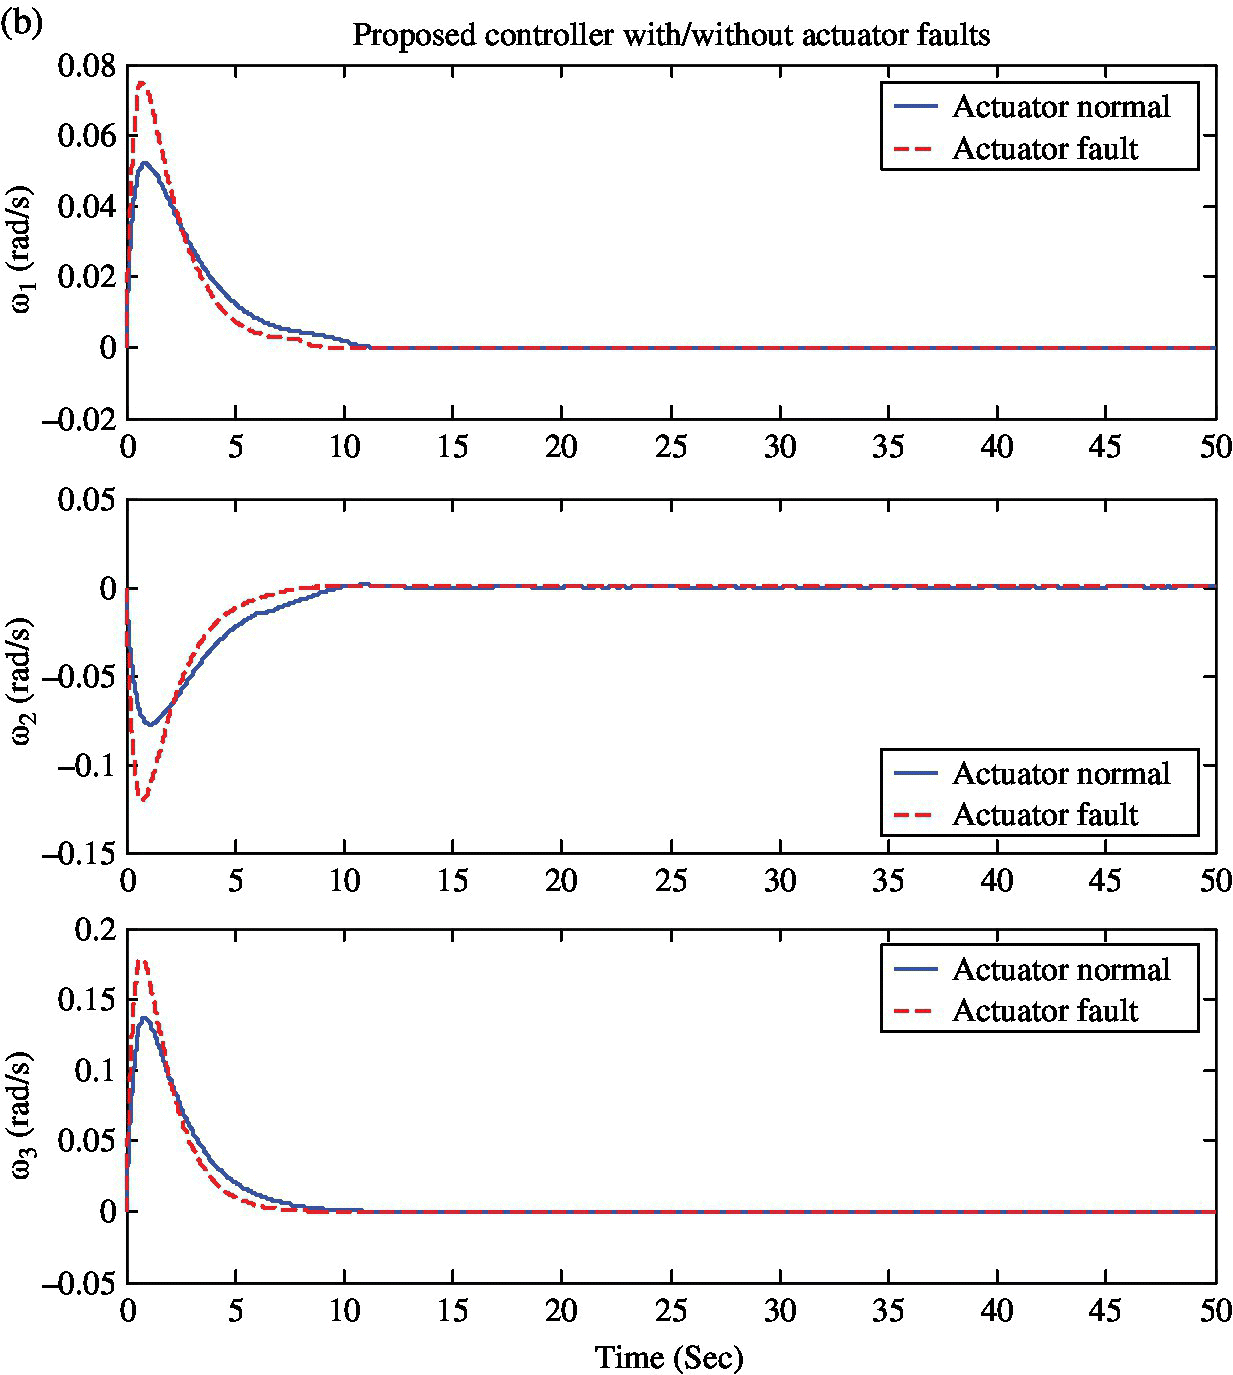 6 Graphs depicting time histories of angular velocity, each with two curves representing Actuator normal (solid) and Actuator fault (dashed).